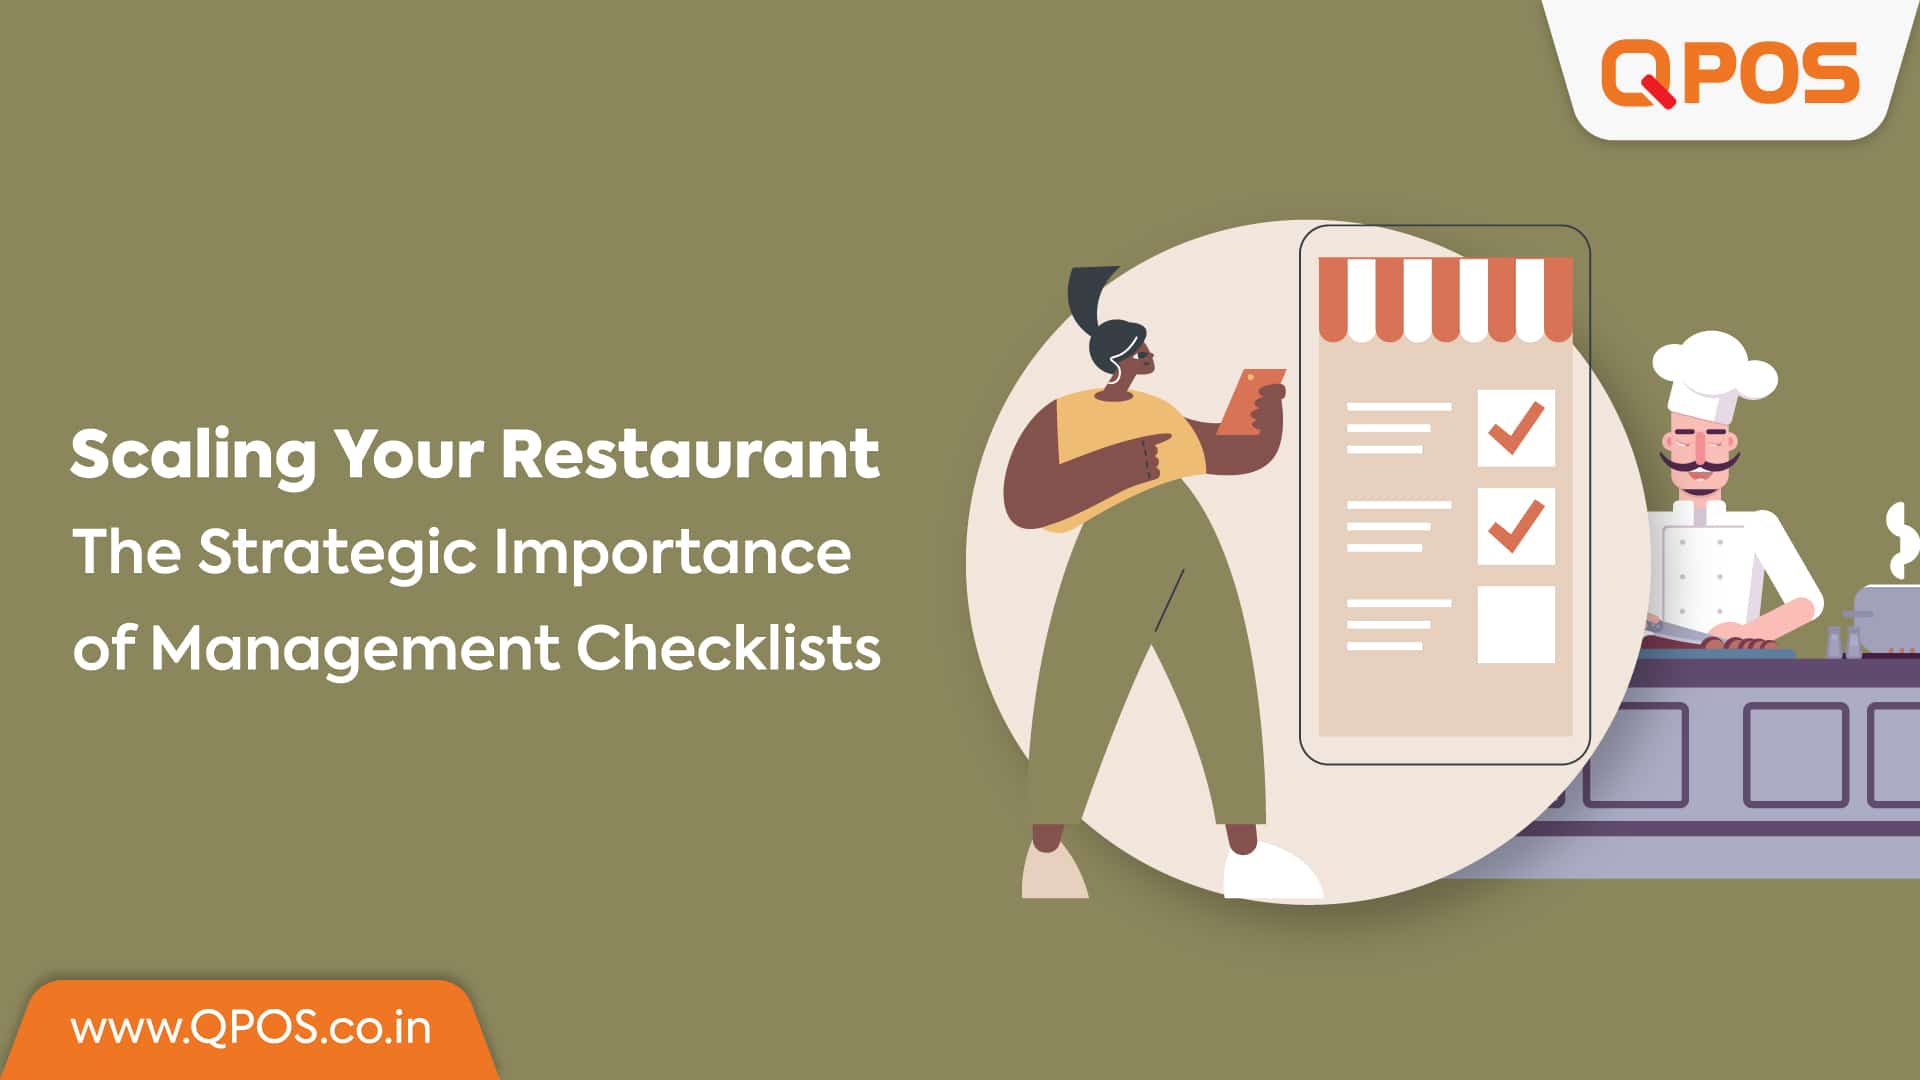 Scaling Your Restaurant: The Strategic Importance of Management Checklists